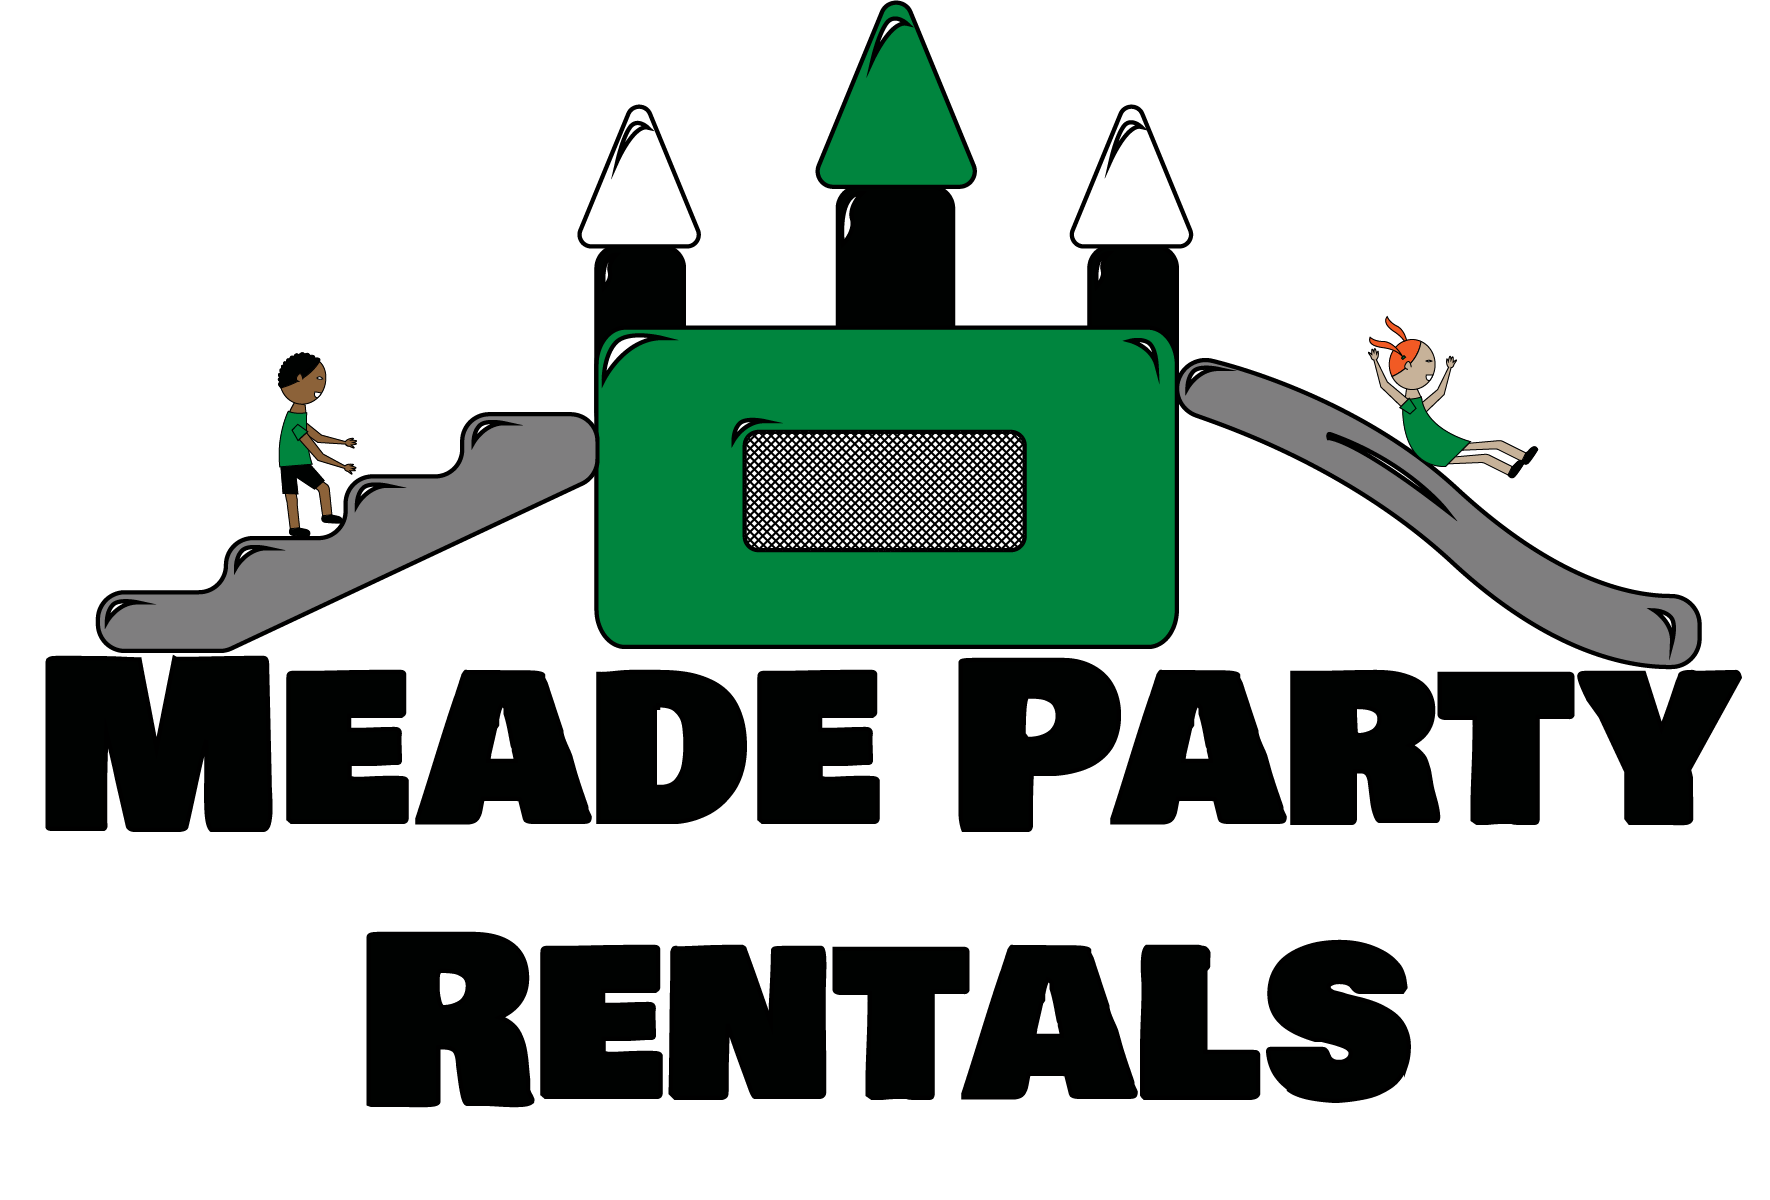 A green and white triangle with two people on it